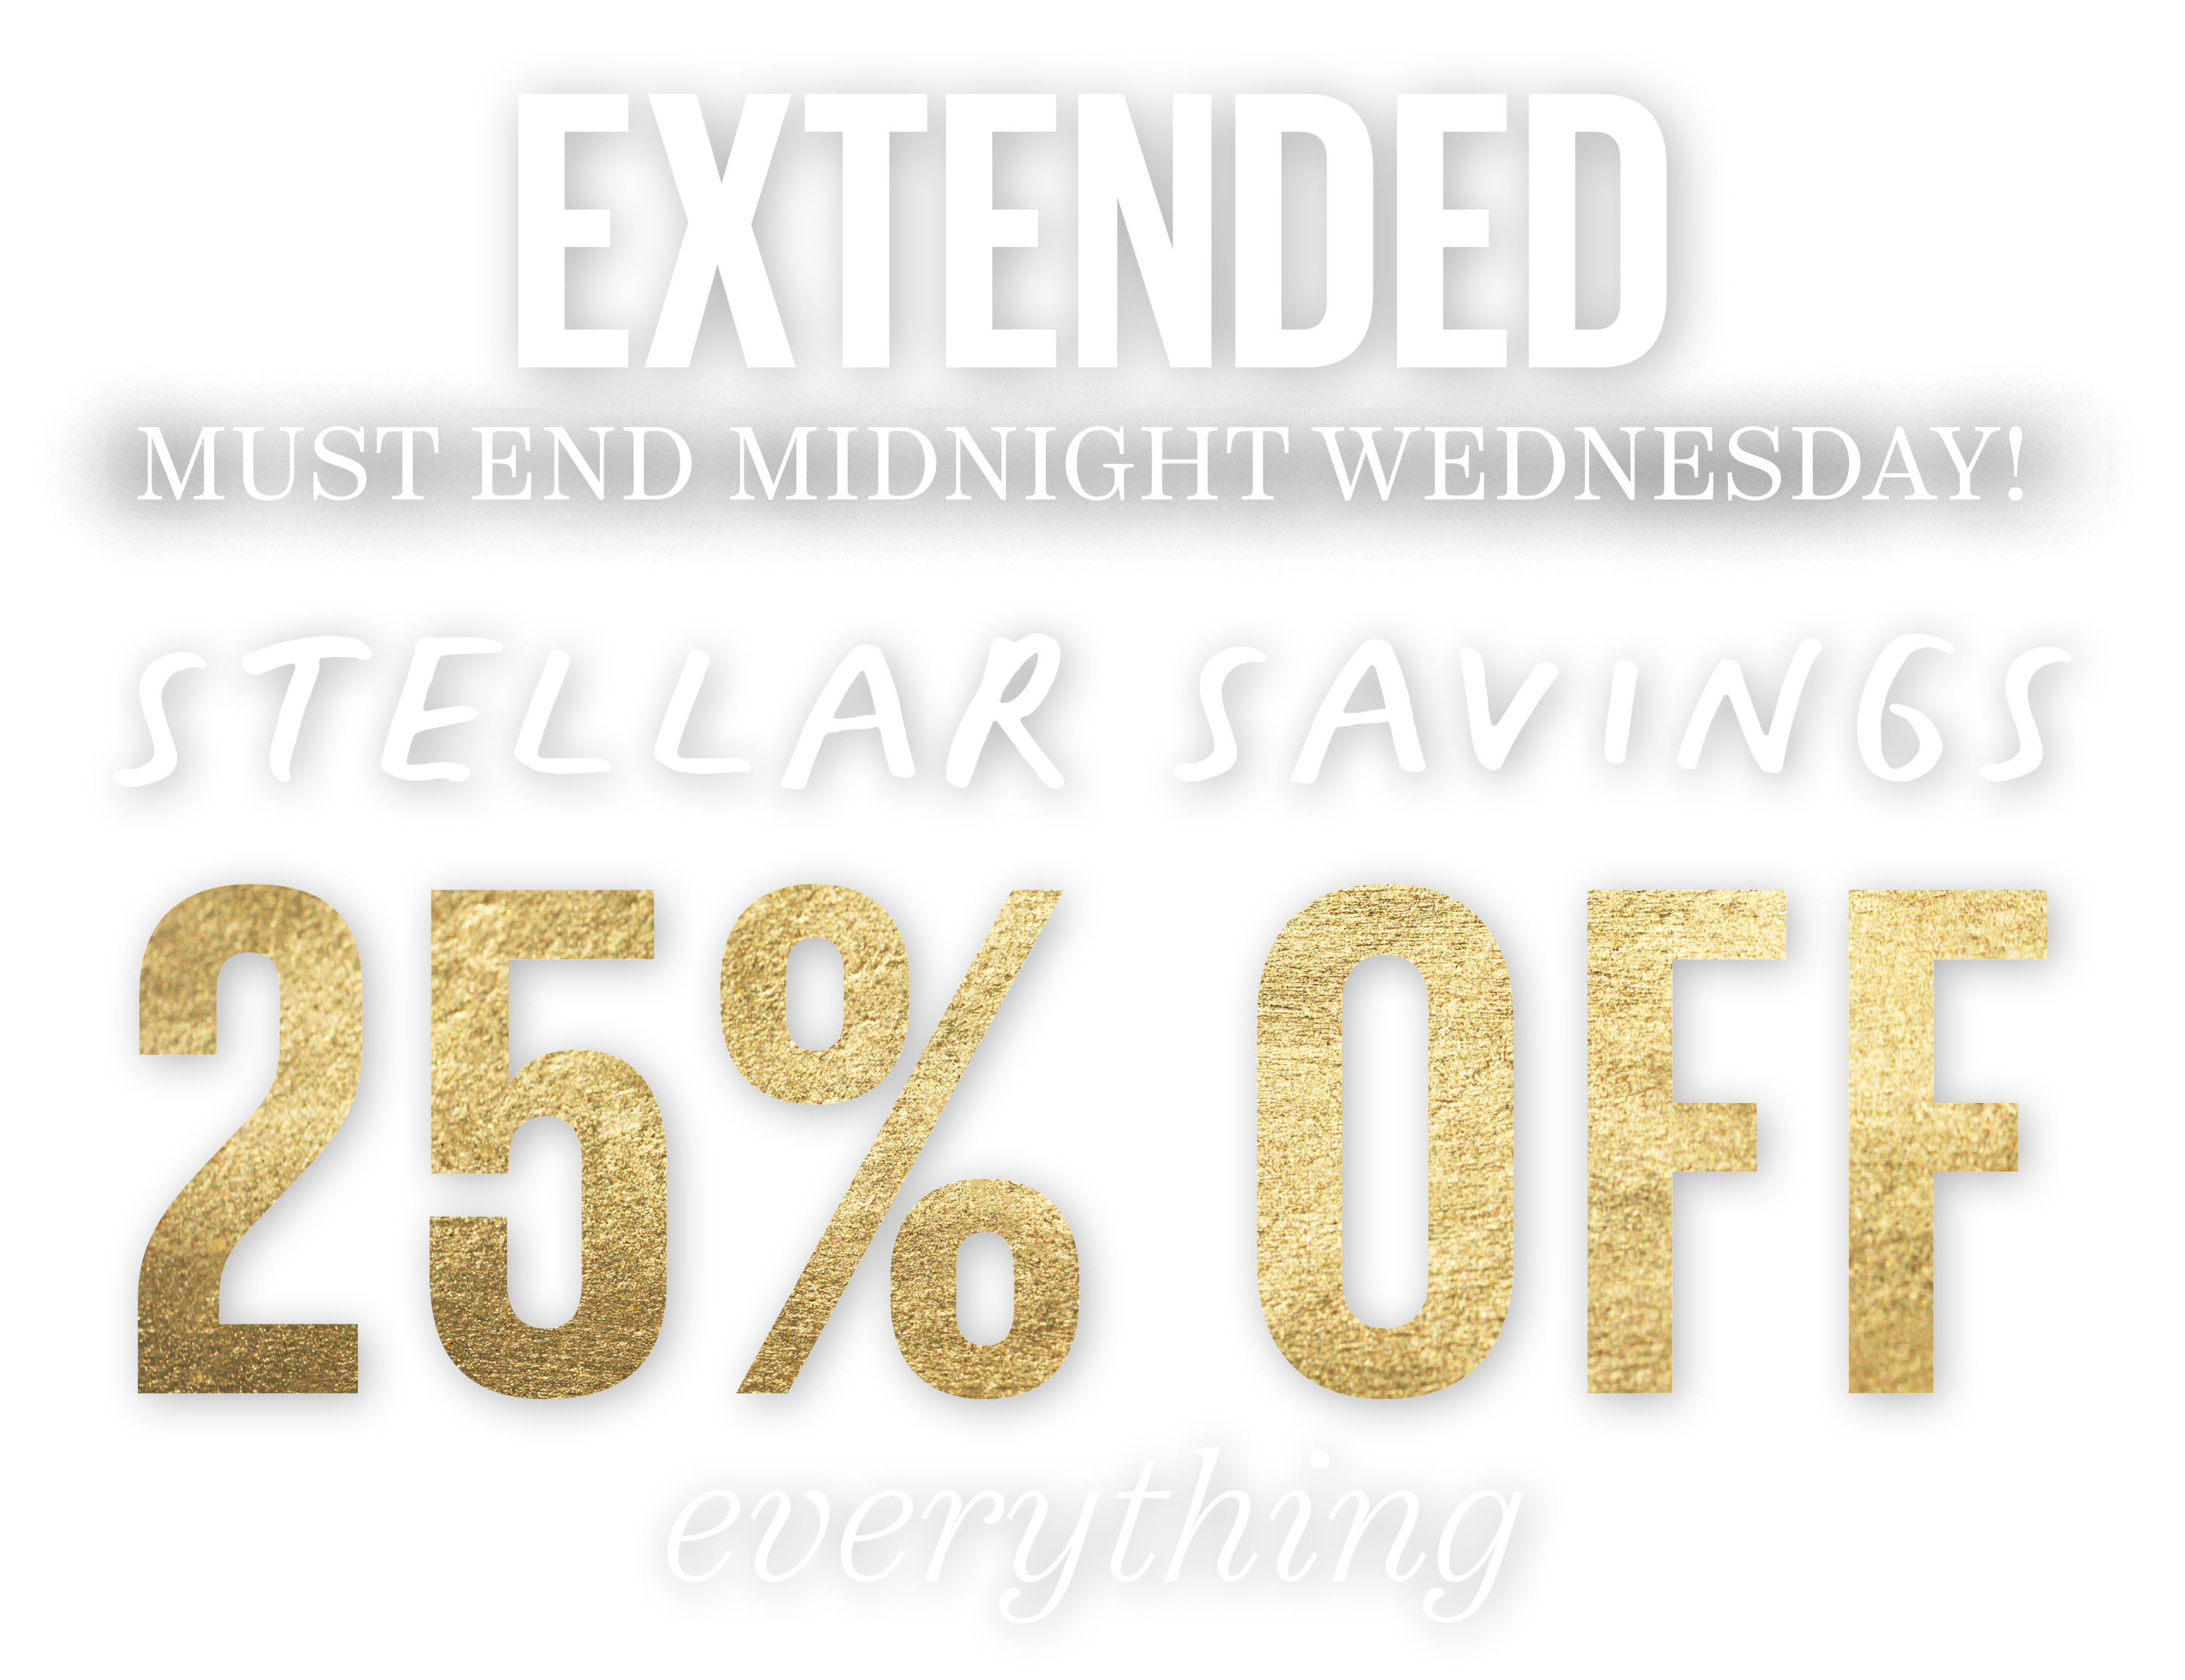 Extended. Must end midnight Wednesday! Stellar Savings. 25% off everything.